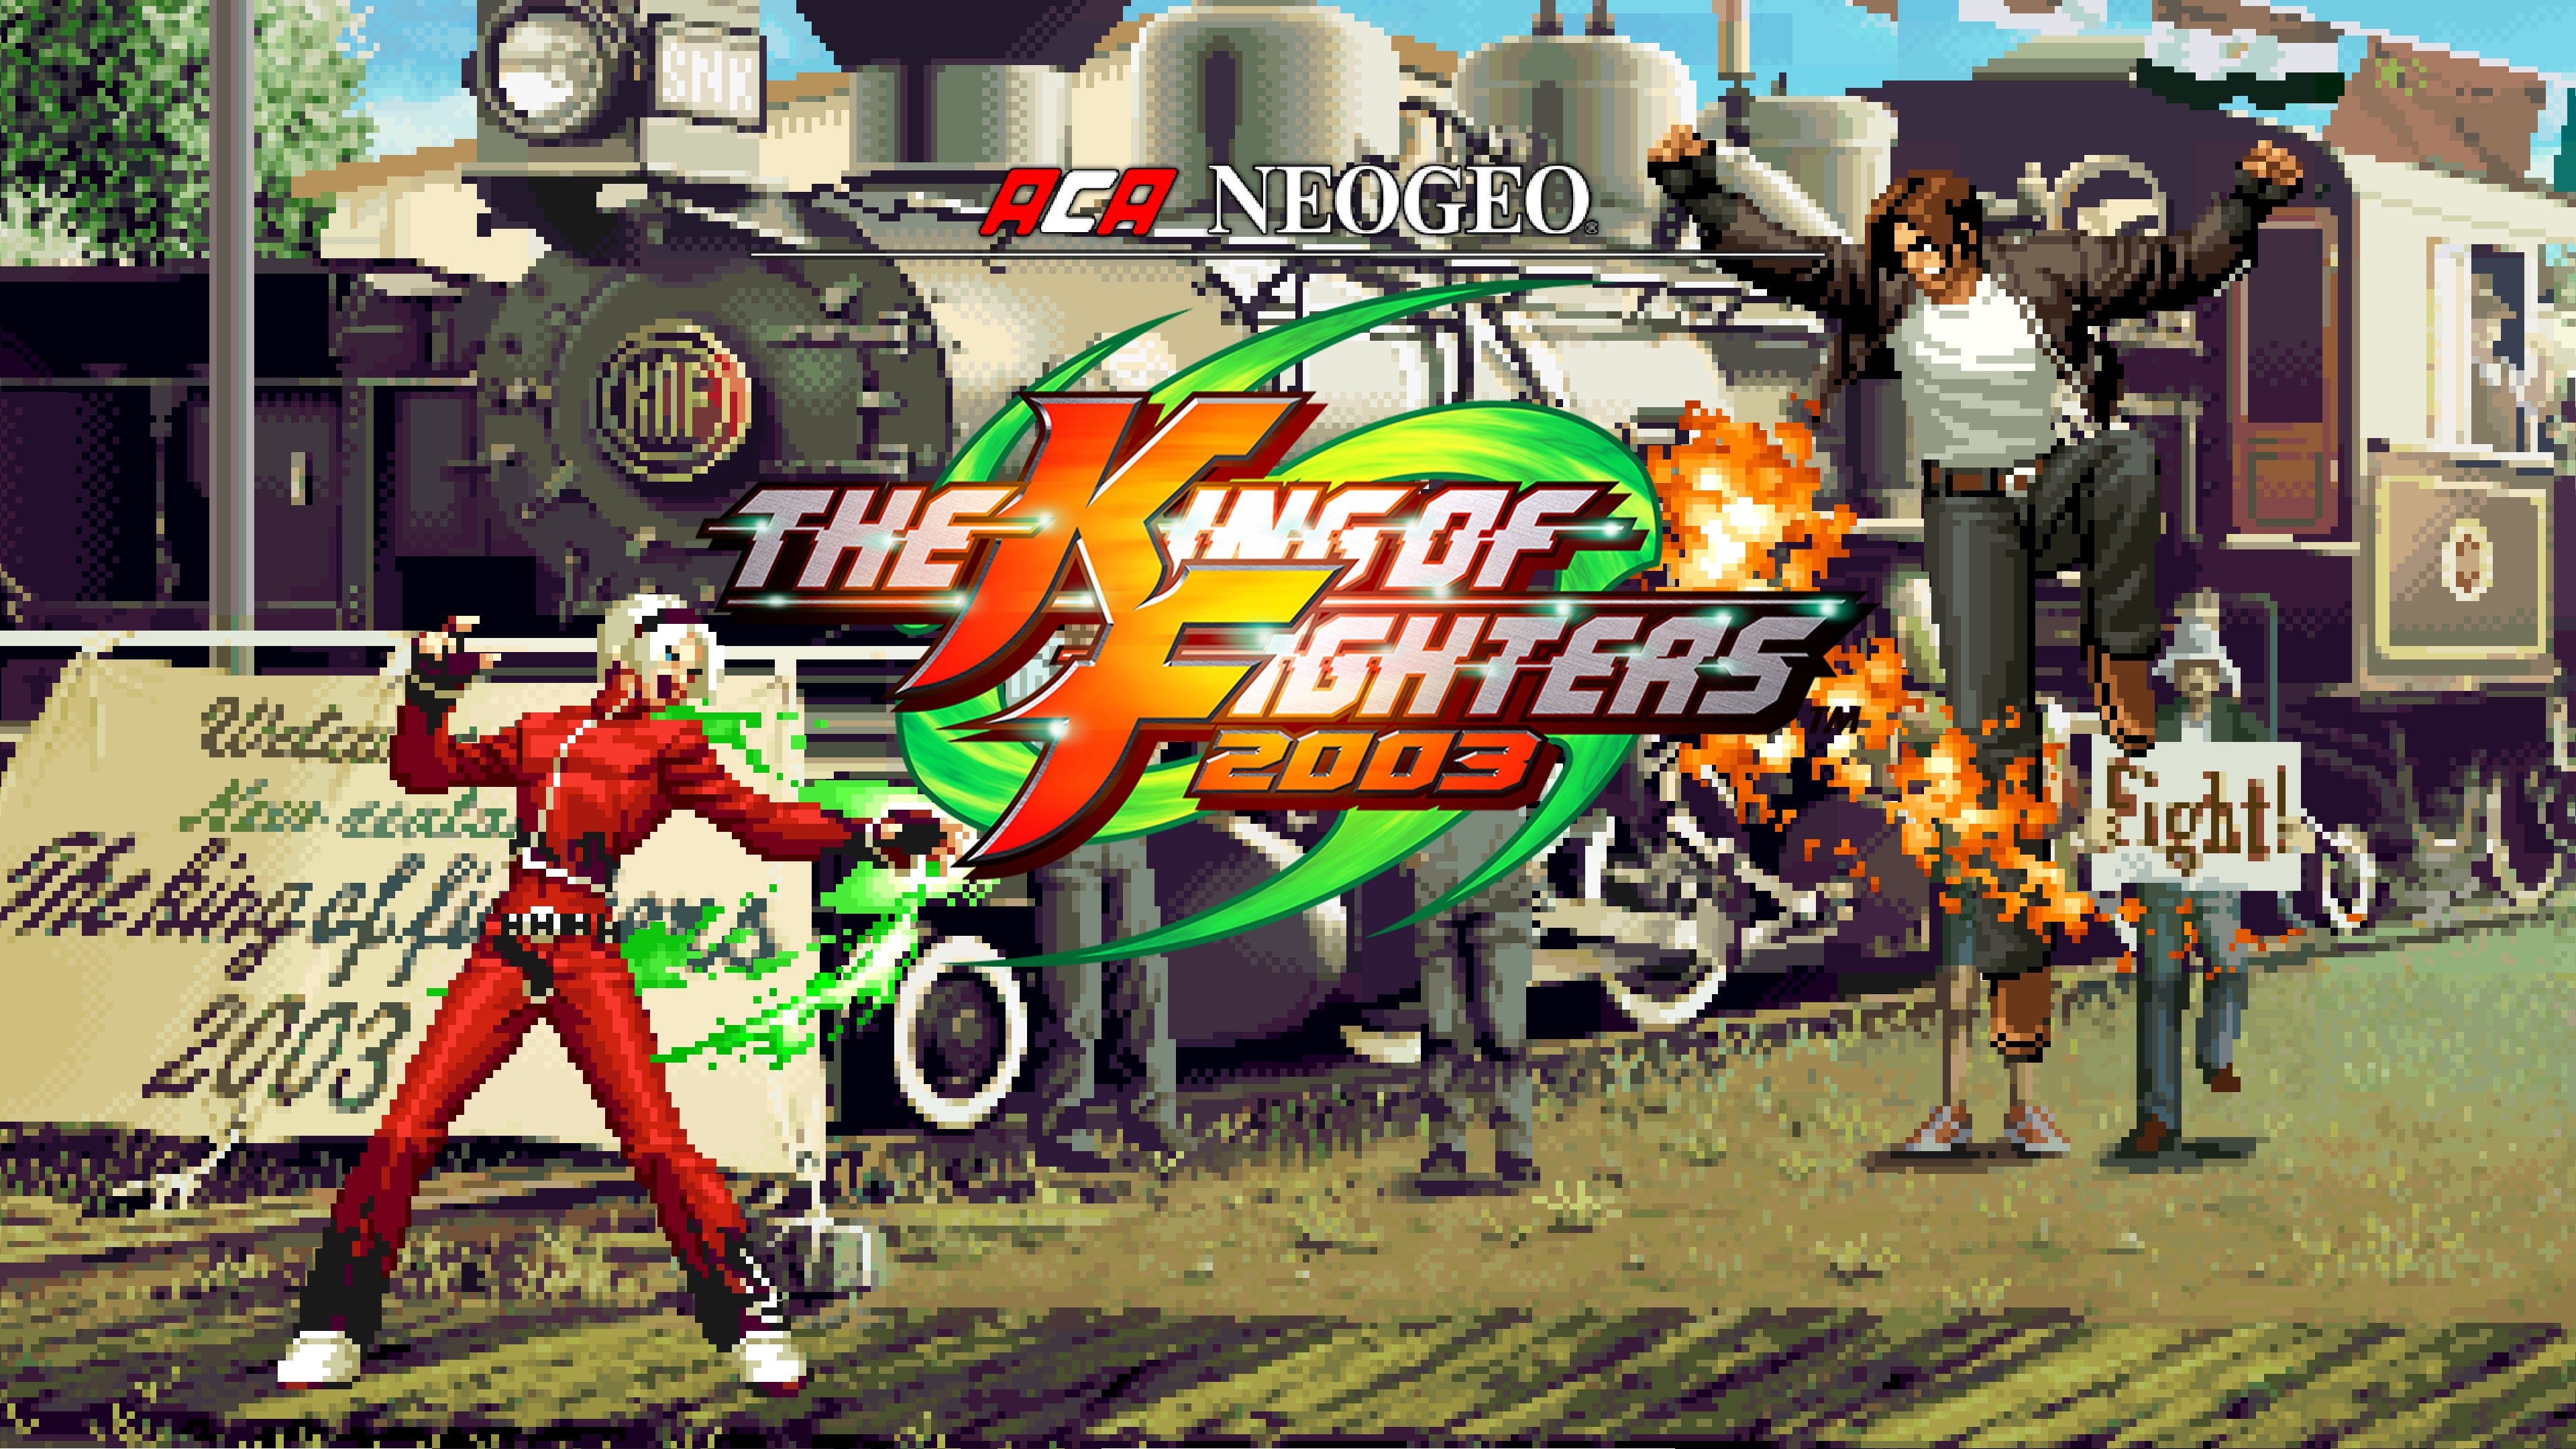 ACA NeoGeo: The King of Fighters 2002 Box Shot for PlayStation 4